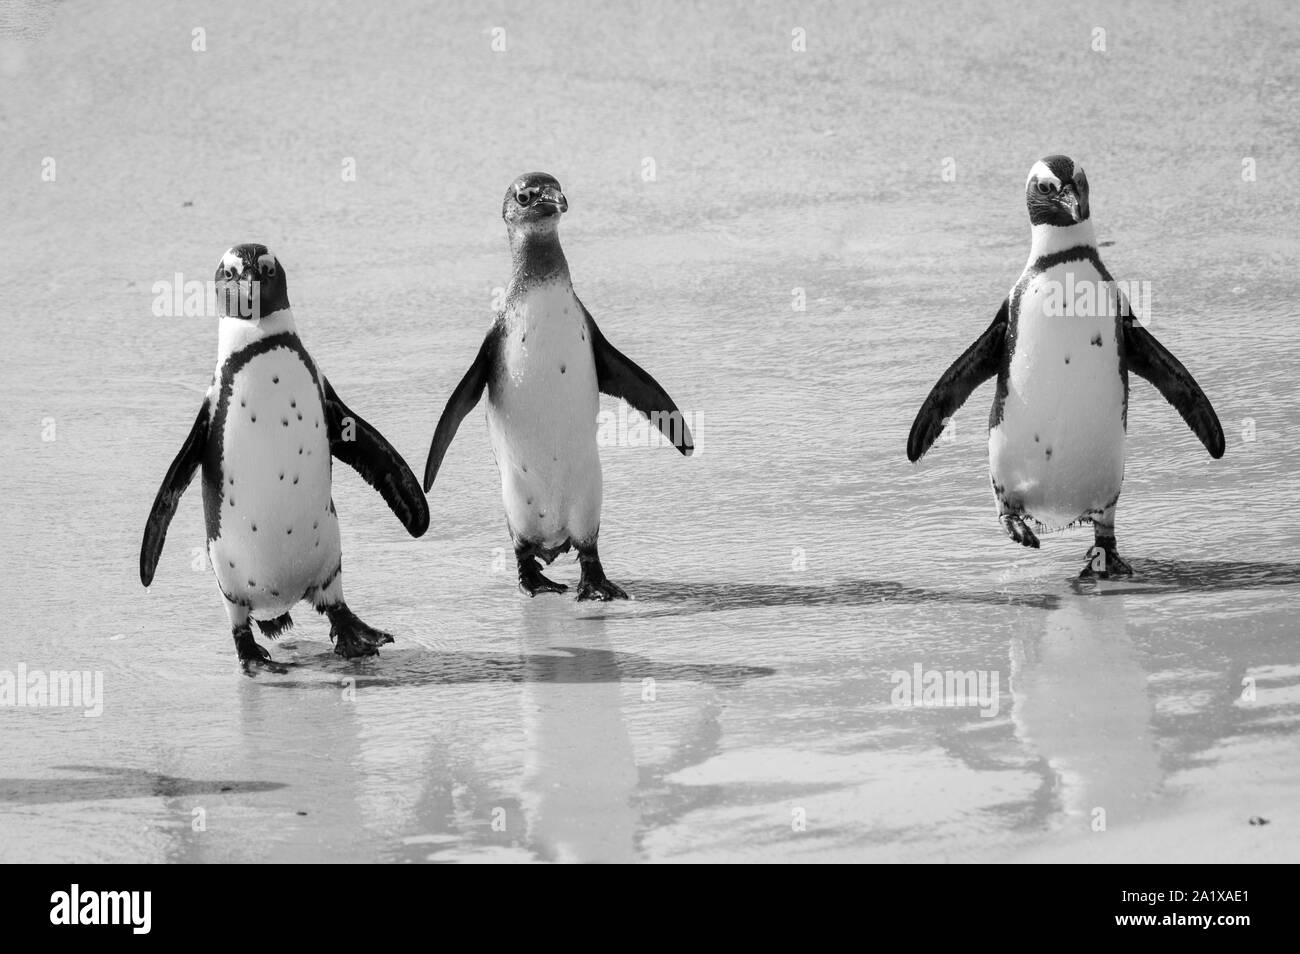 Penguins walking along the beach in Cape Town, South Africa Stock Photo